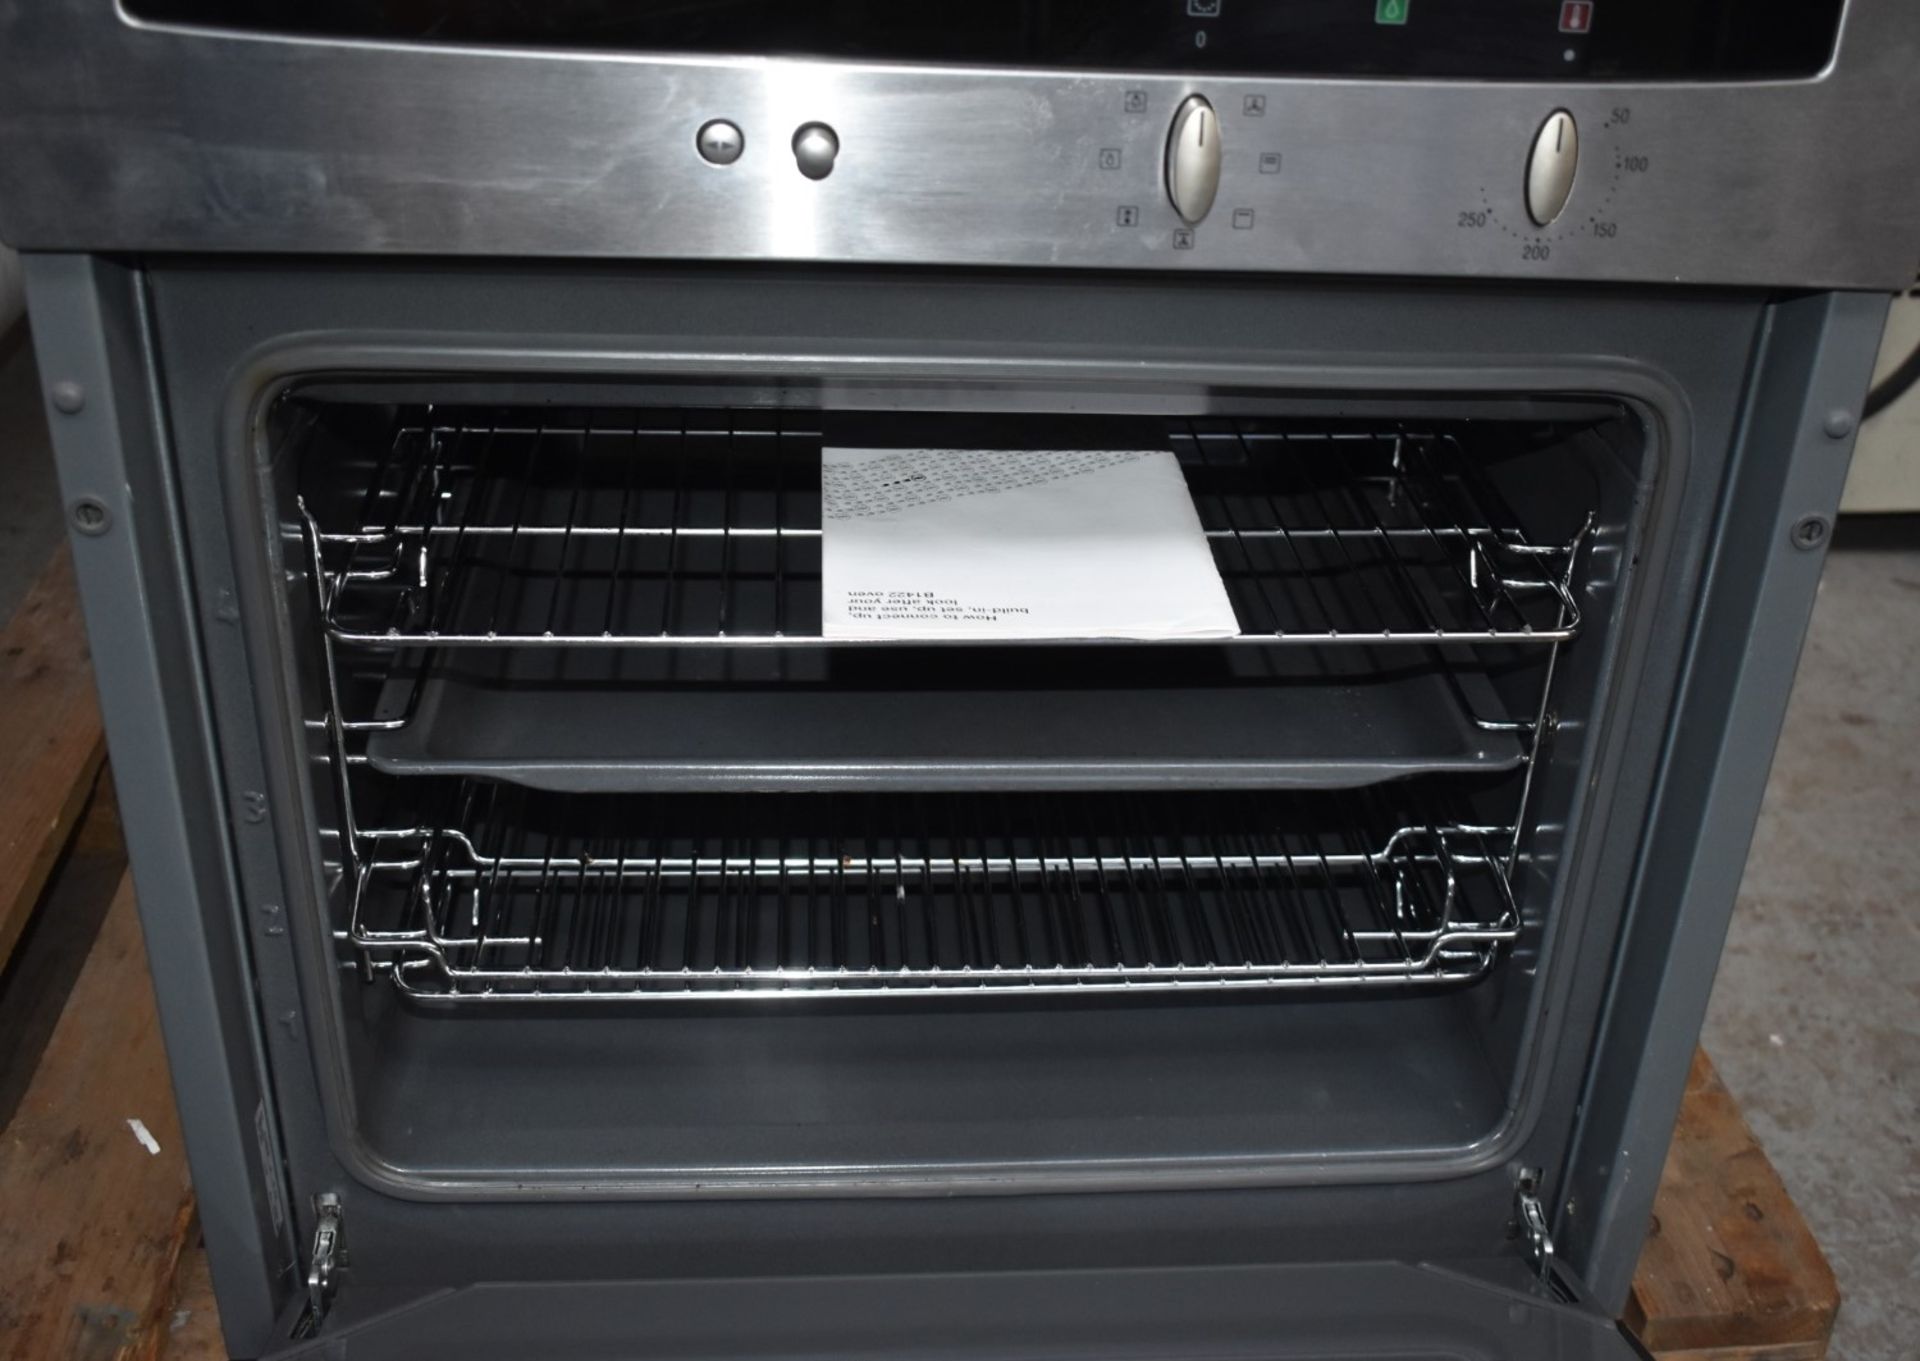 1 x Neff Built-in Electric Fan Oven  With Stainless Steel Finish - Model HBB-AP32-7 - Includes - Image 5 of 6